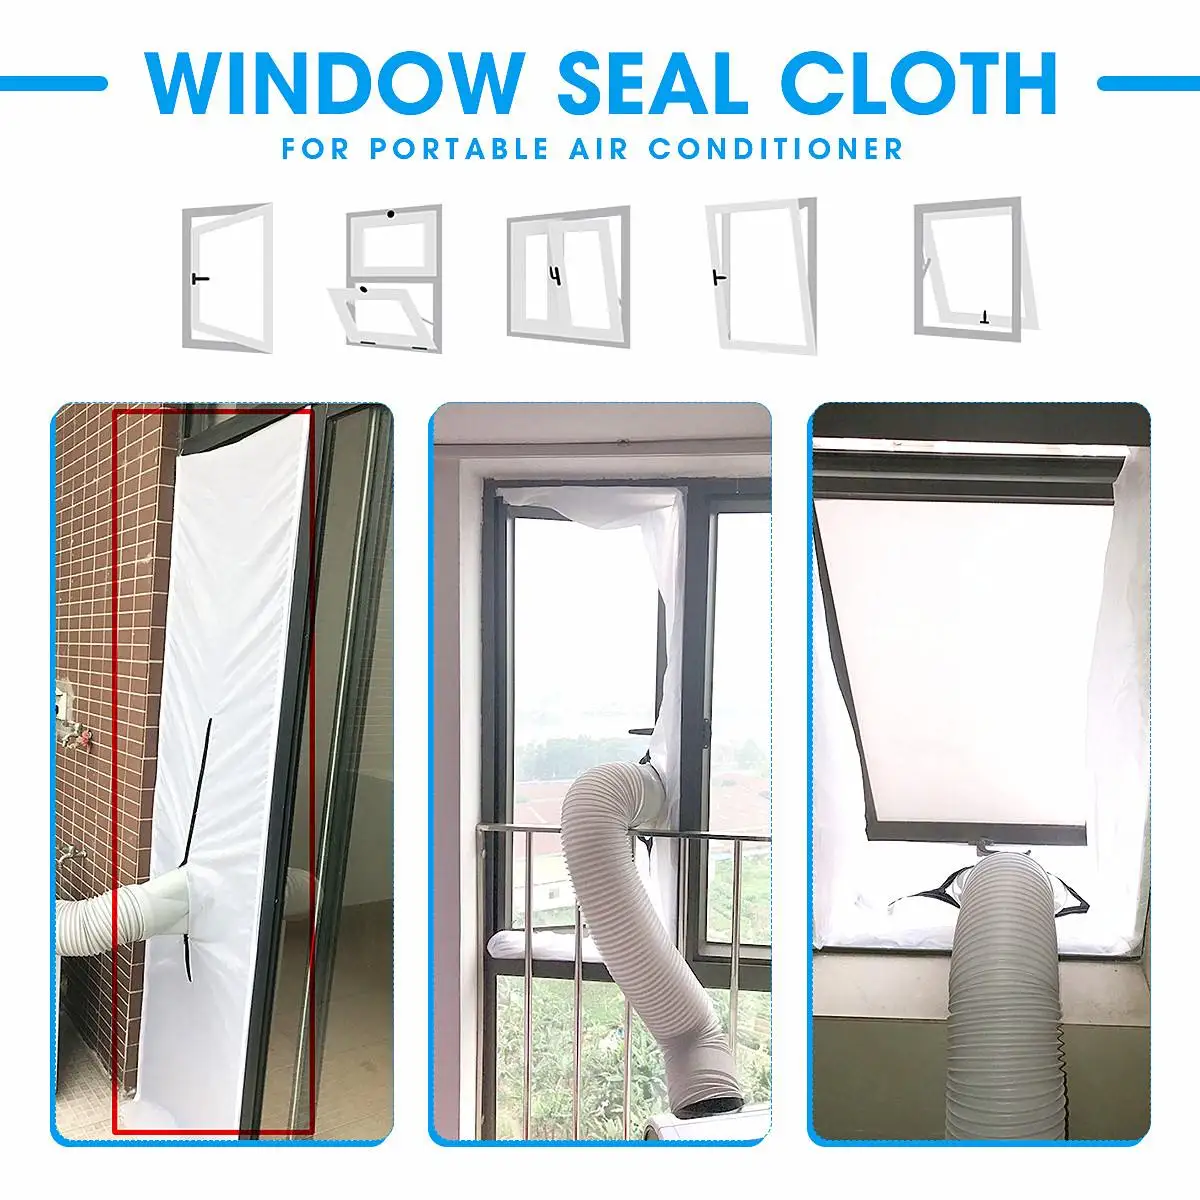 NEW TY Warmtoo Portable Air Conditioner Window Air Vent Seal Lock Cloth Plate Air Outlet Pipe Tube Hose Window Sliding Door